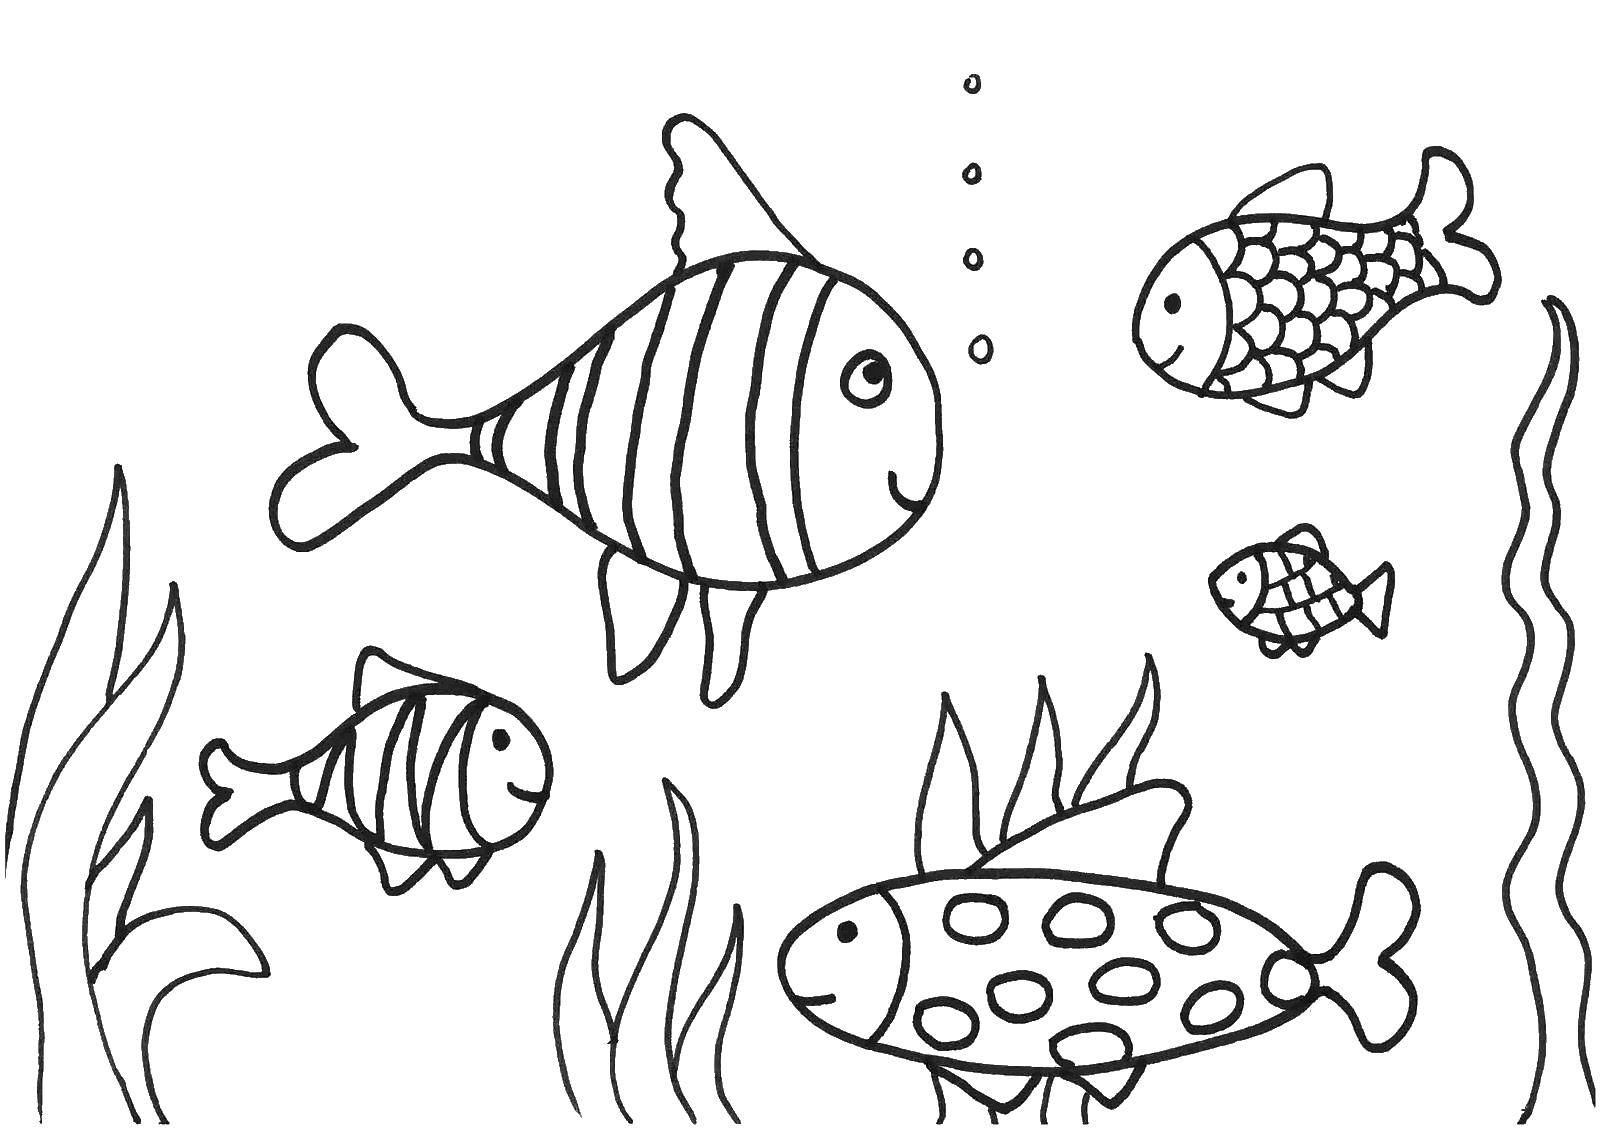 Coloring Fishes in the water. Category fish. Tags:  fish, water, sea, fish.